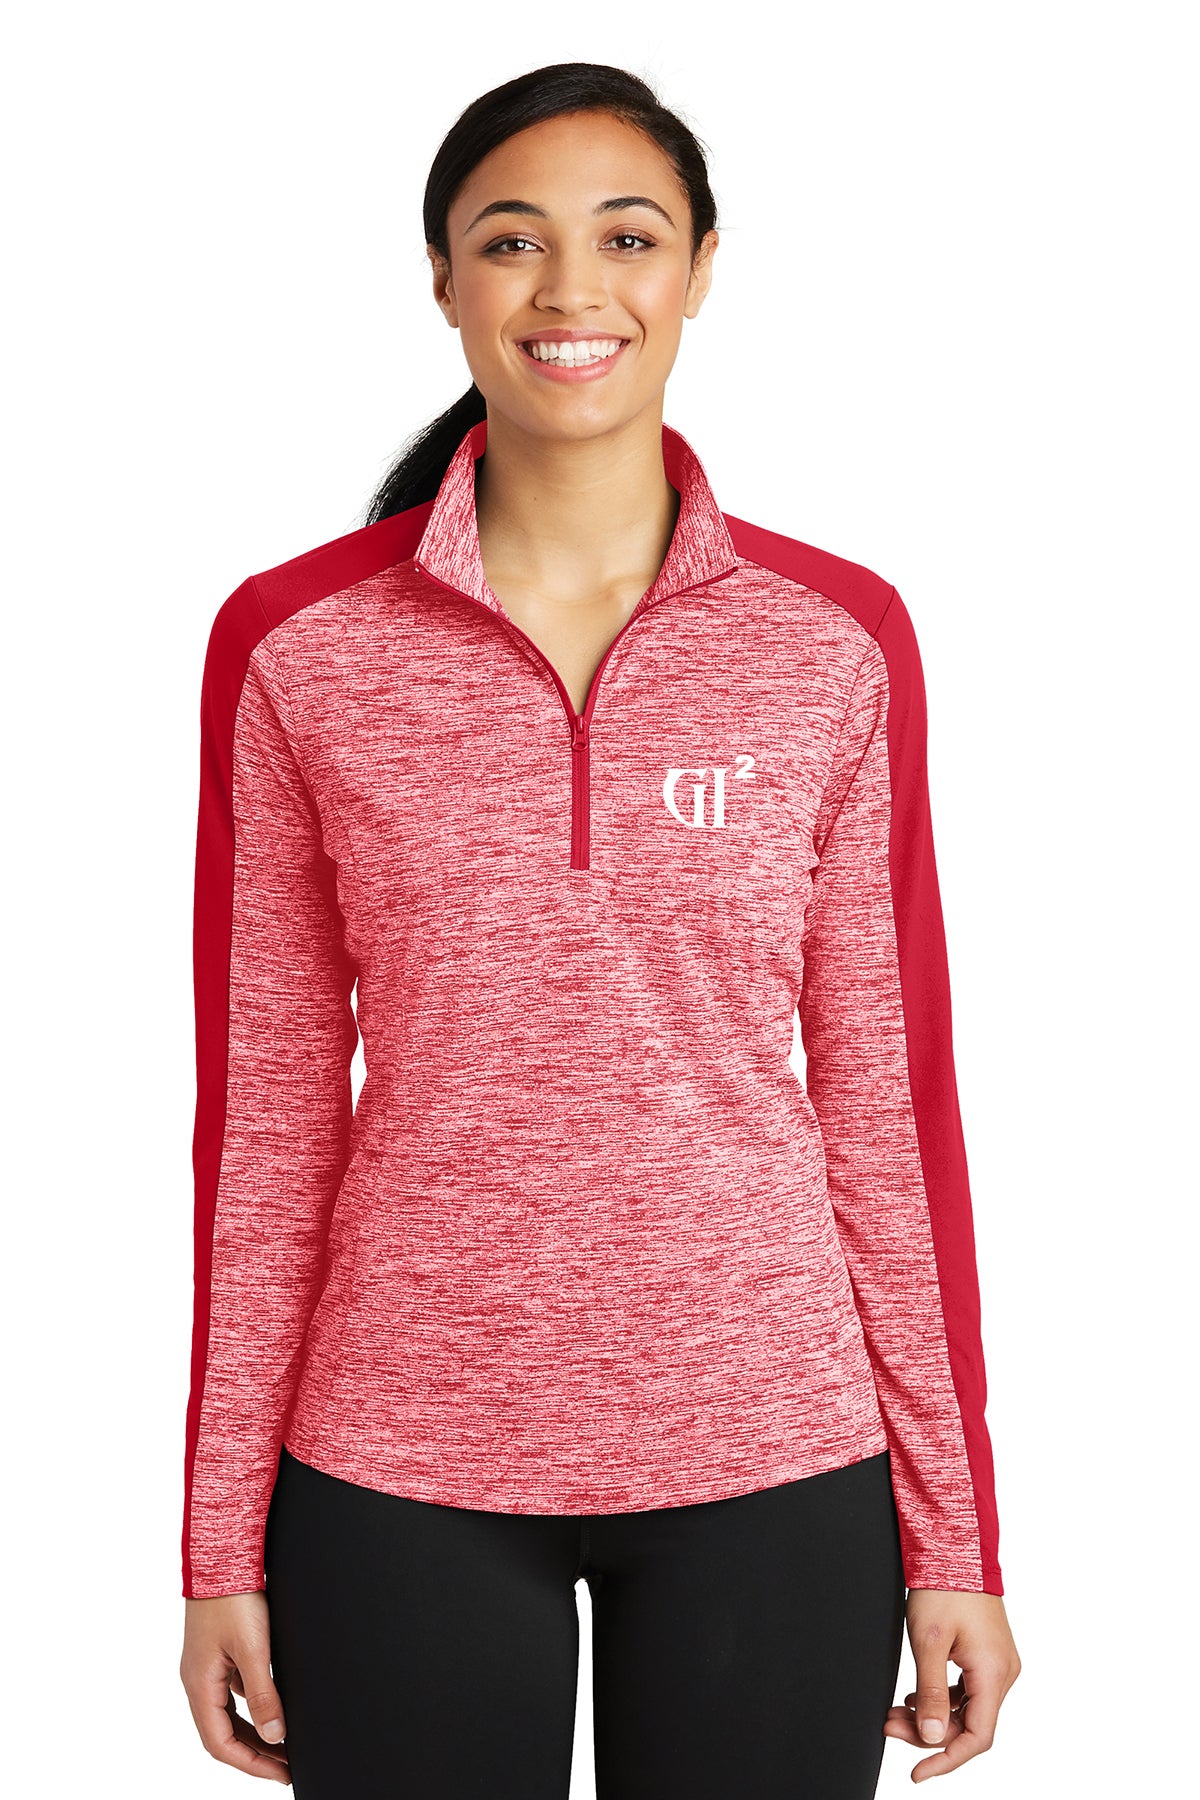 Ladies 1/4 Heather  color block pull over - GET IT IN Apparel